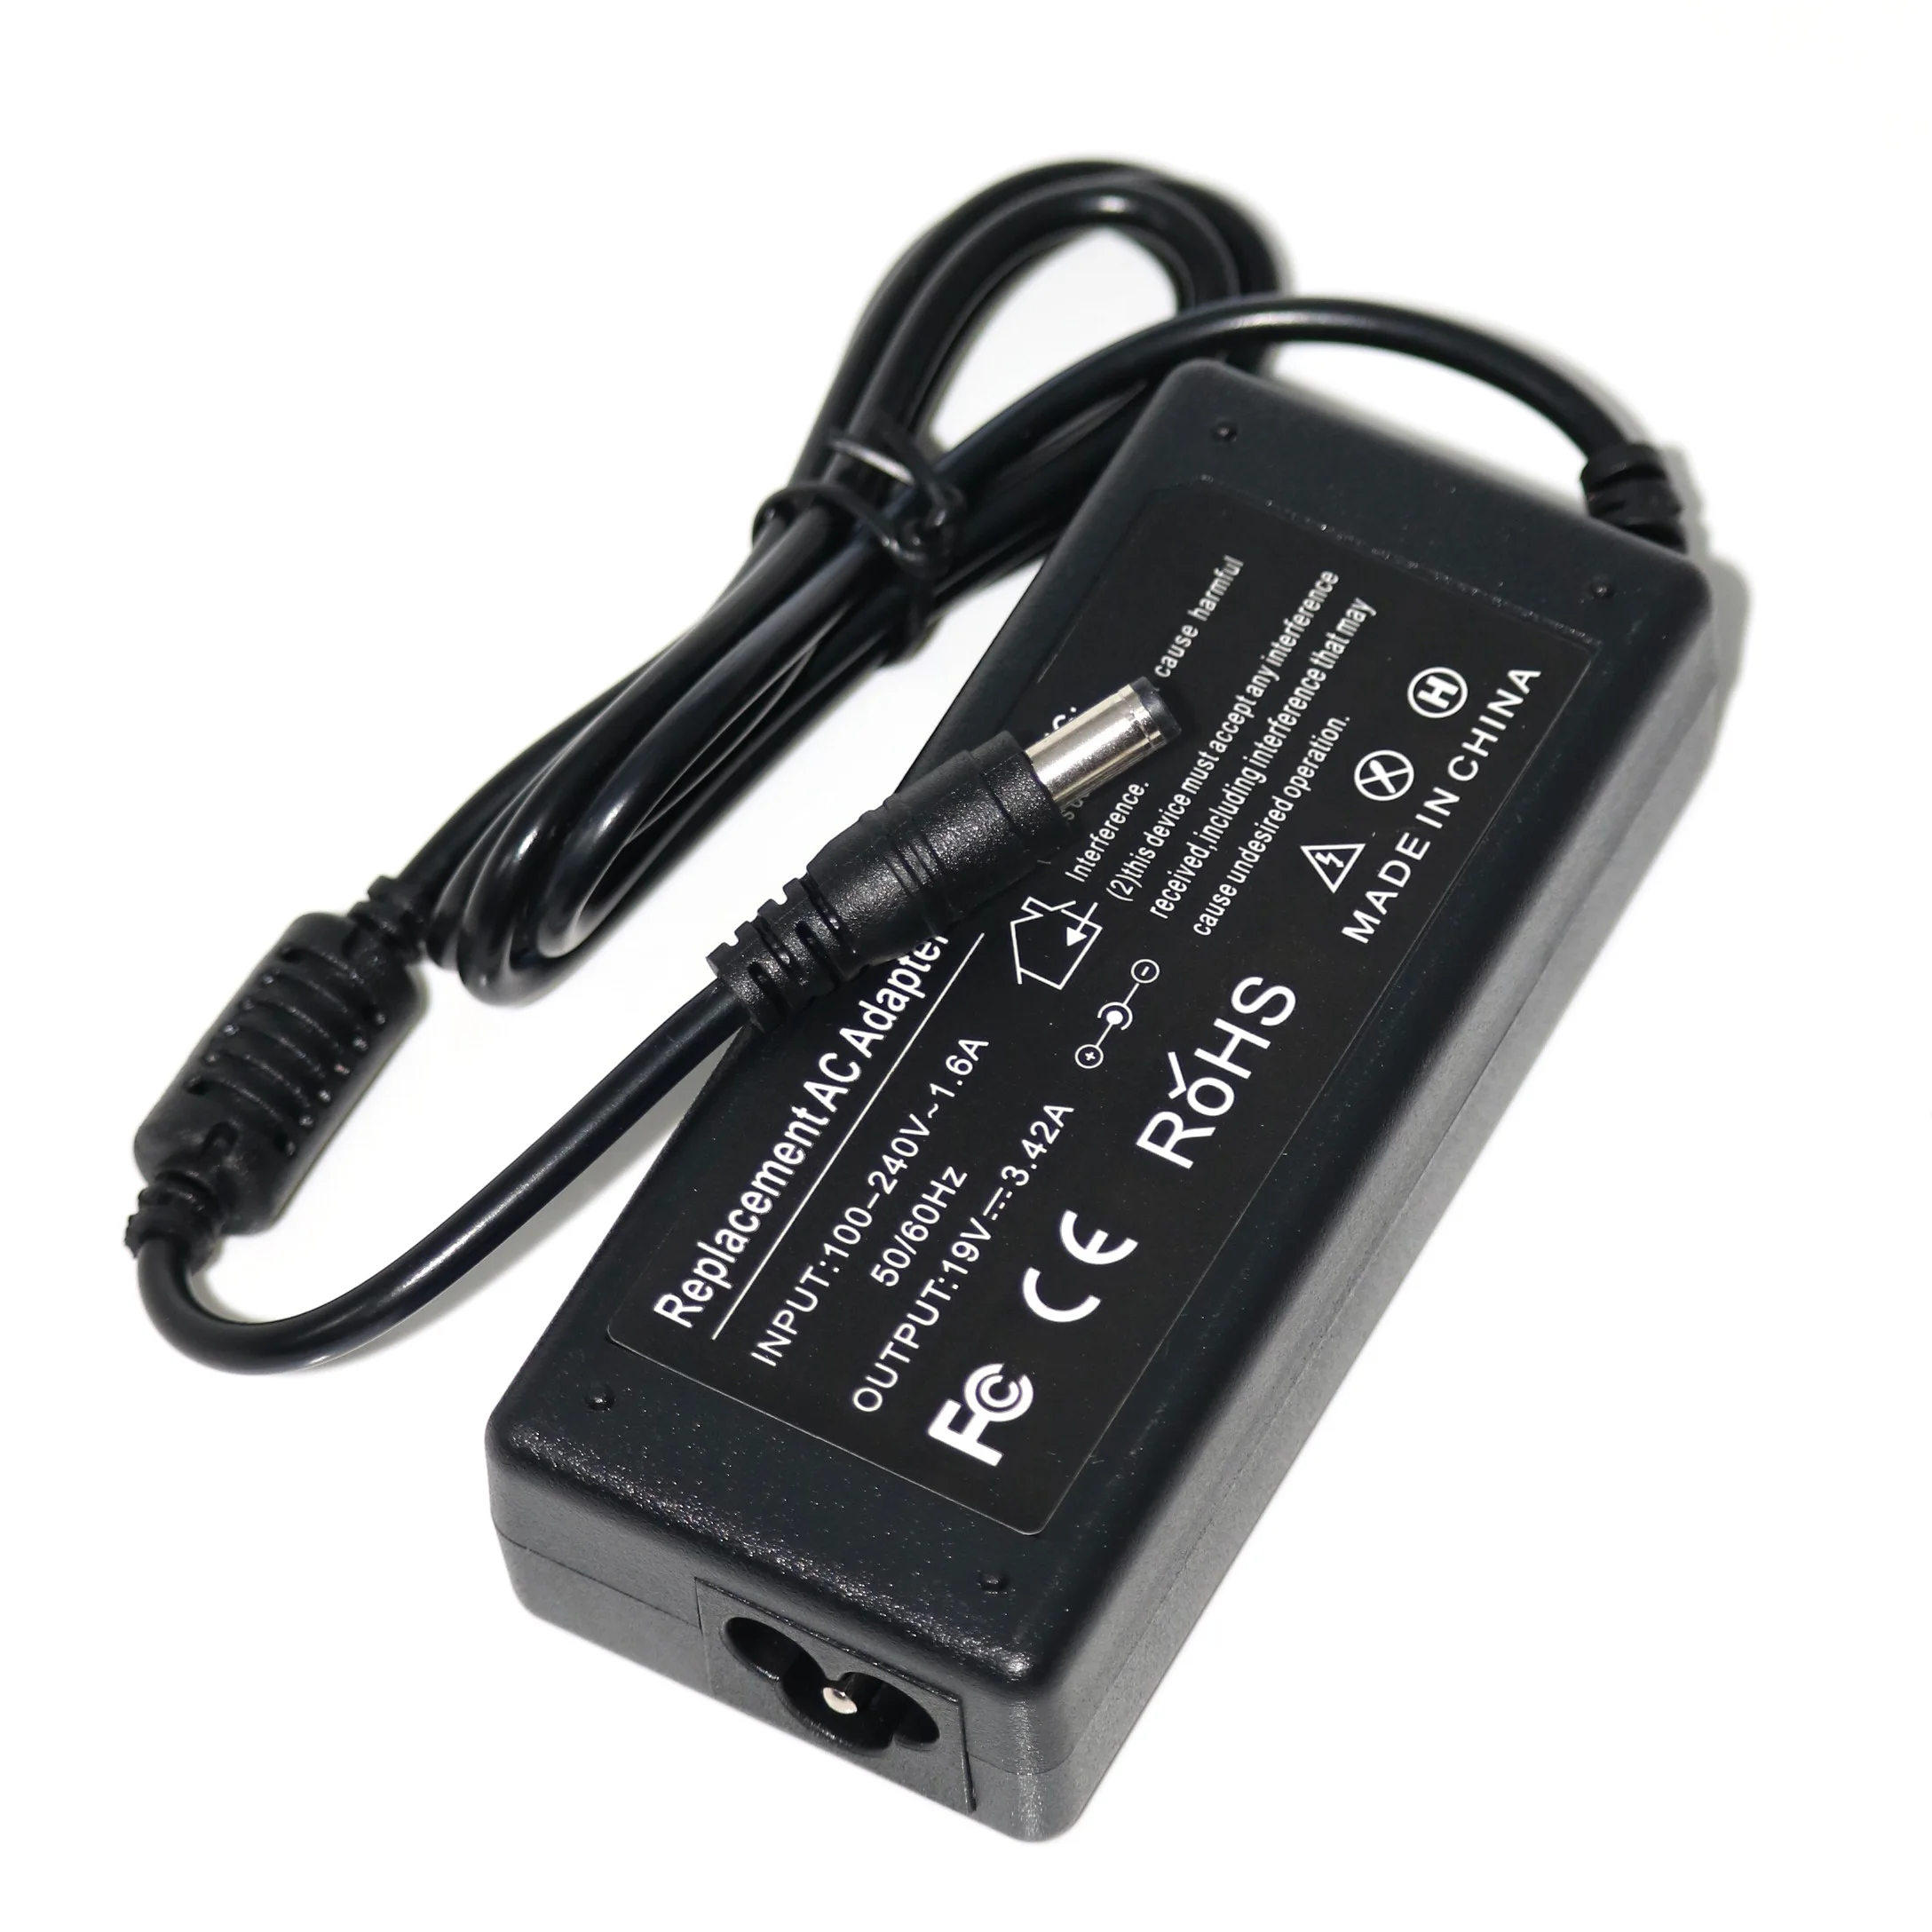 

19V 3.42A 65W 5.5x2.5mm AC Adapter Power Supply Laptop Charger For Asus X45A X550 X550ZA X551M X550L X551 X555L F555L S46 S451